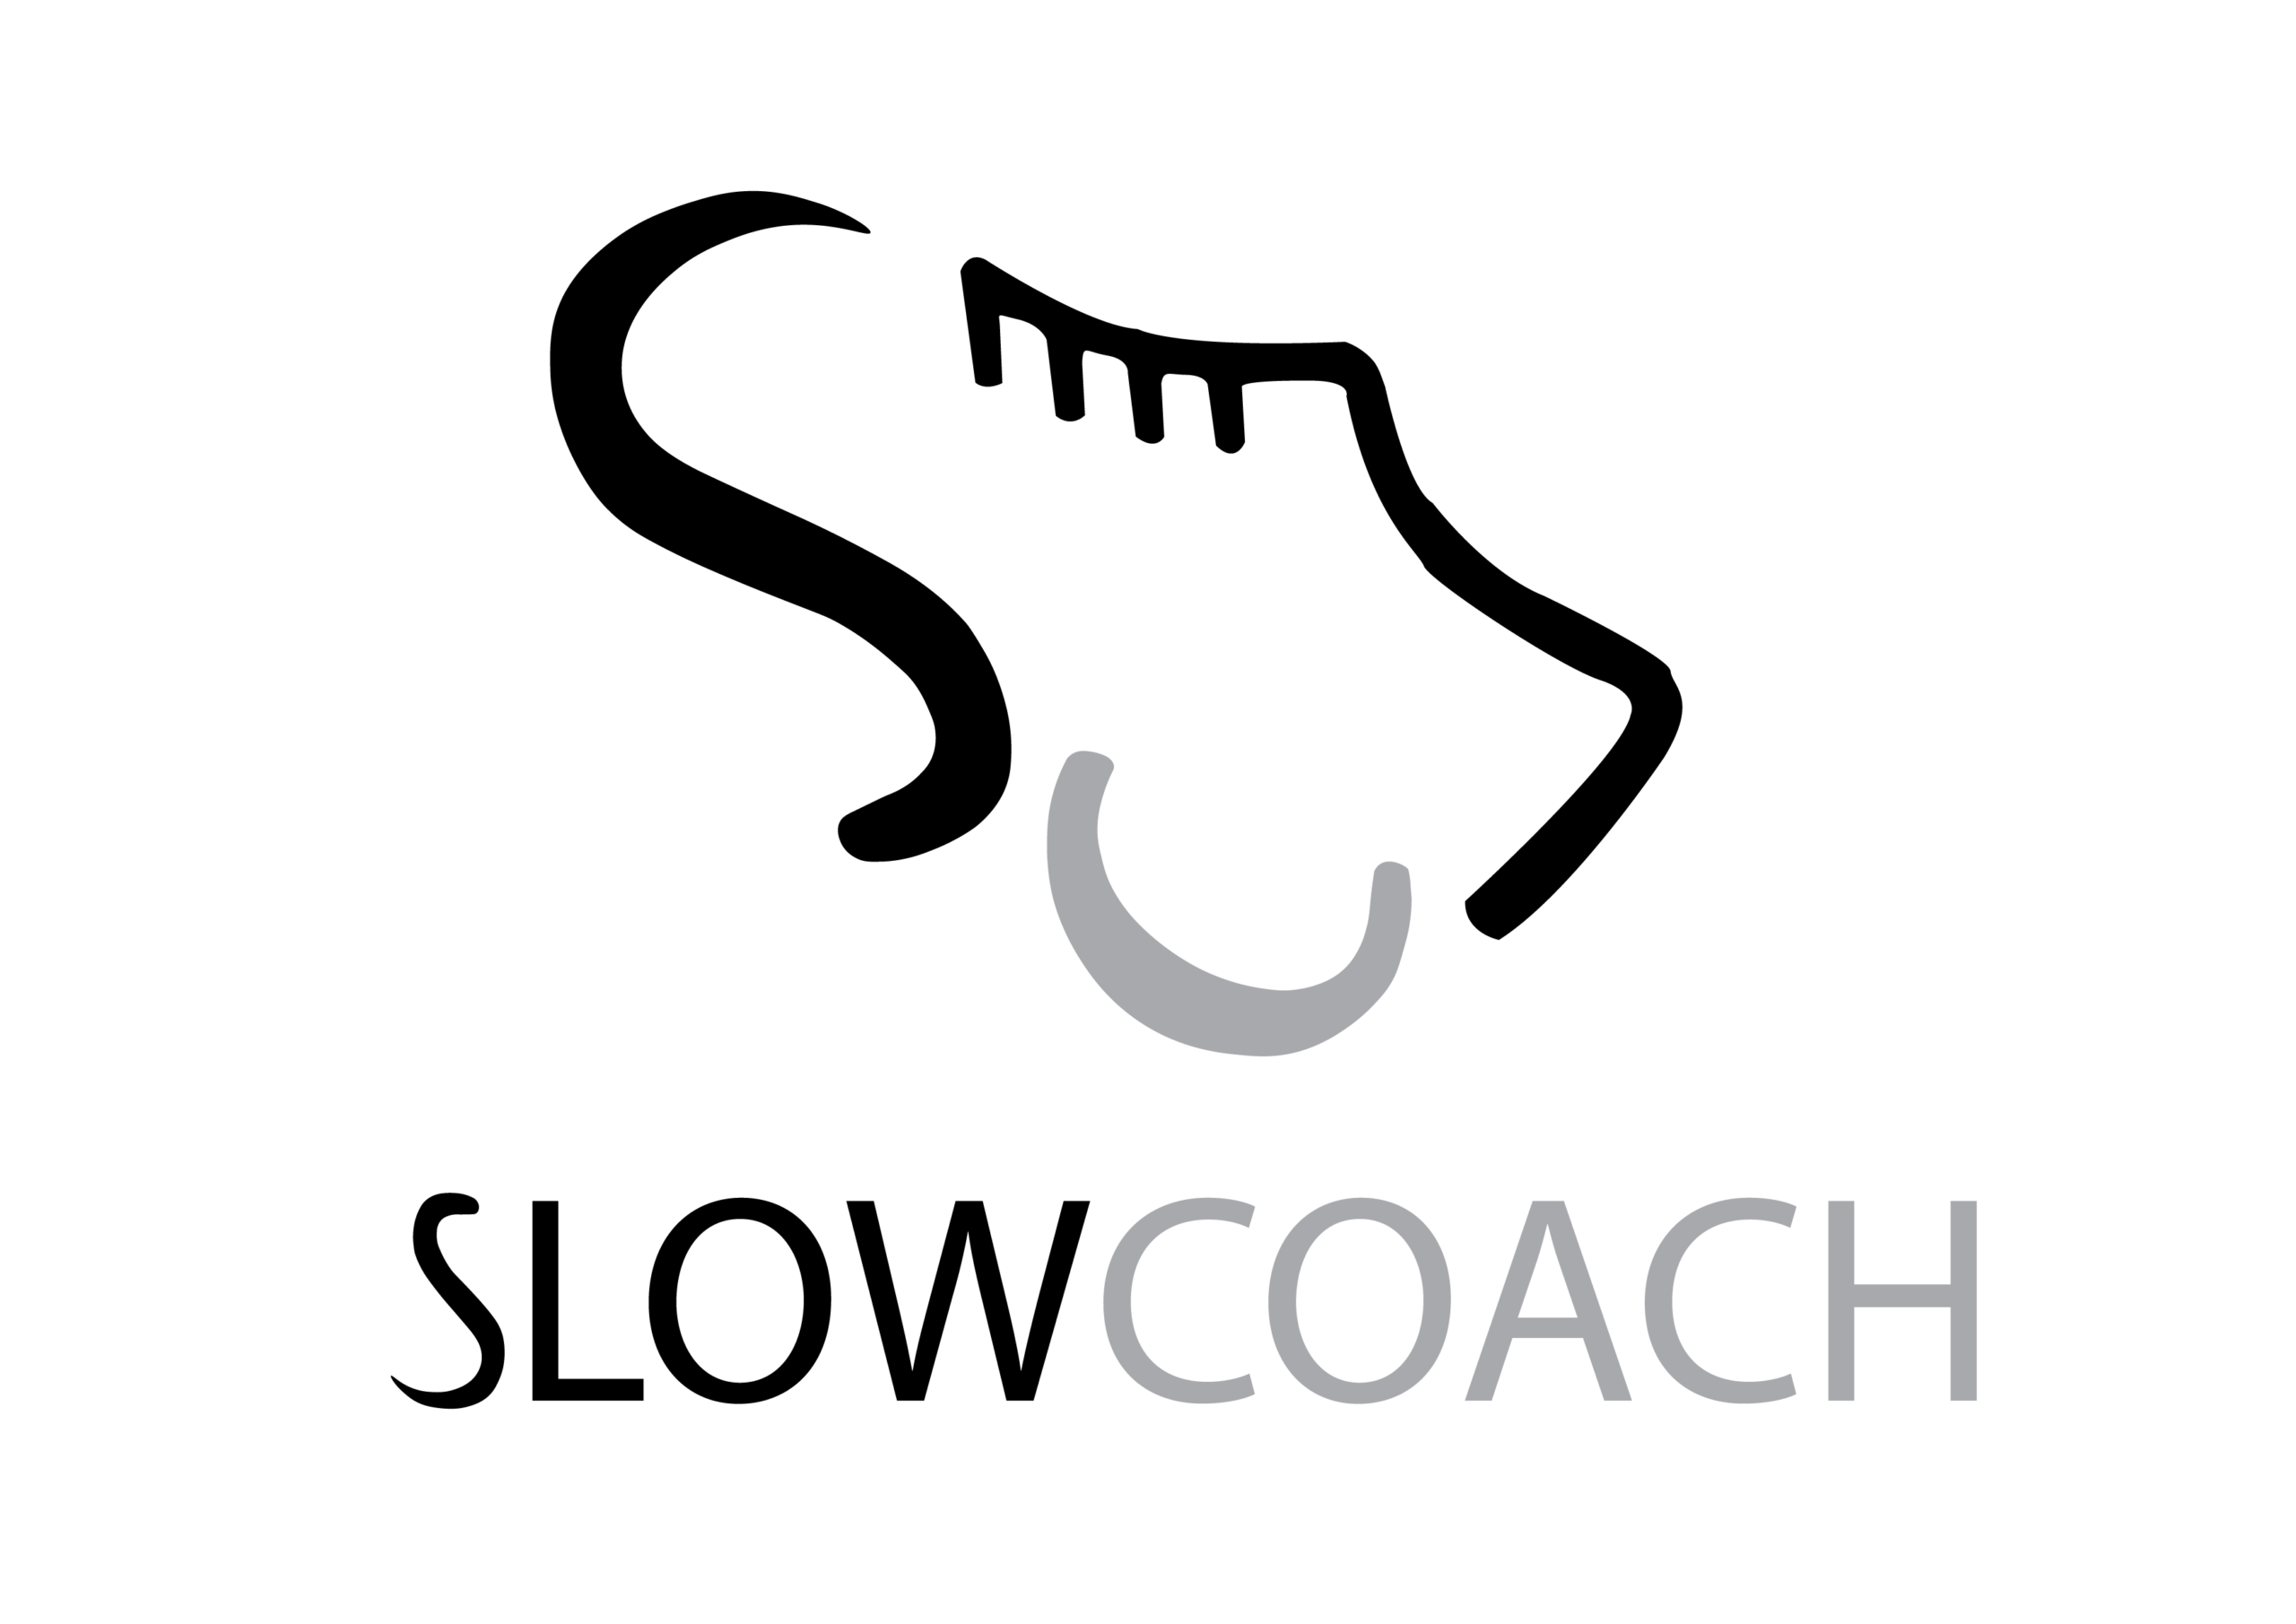 Run with the Slow Coach logo